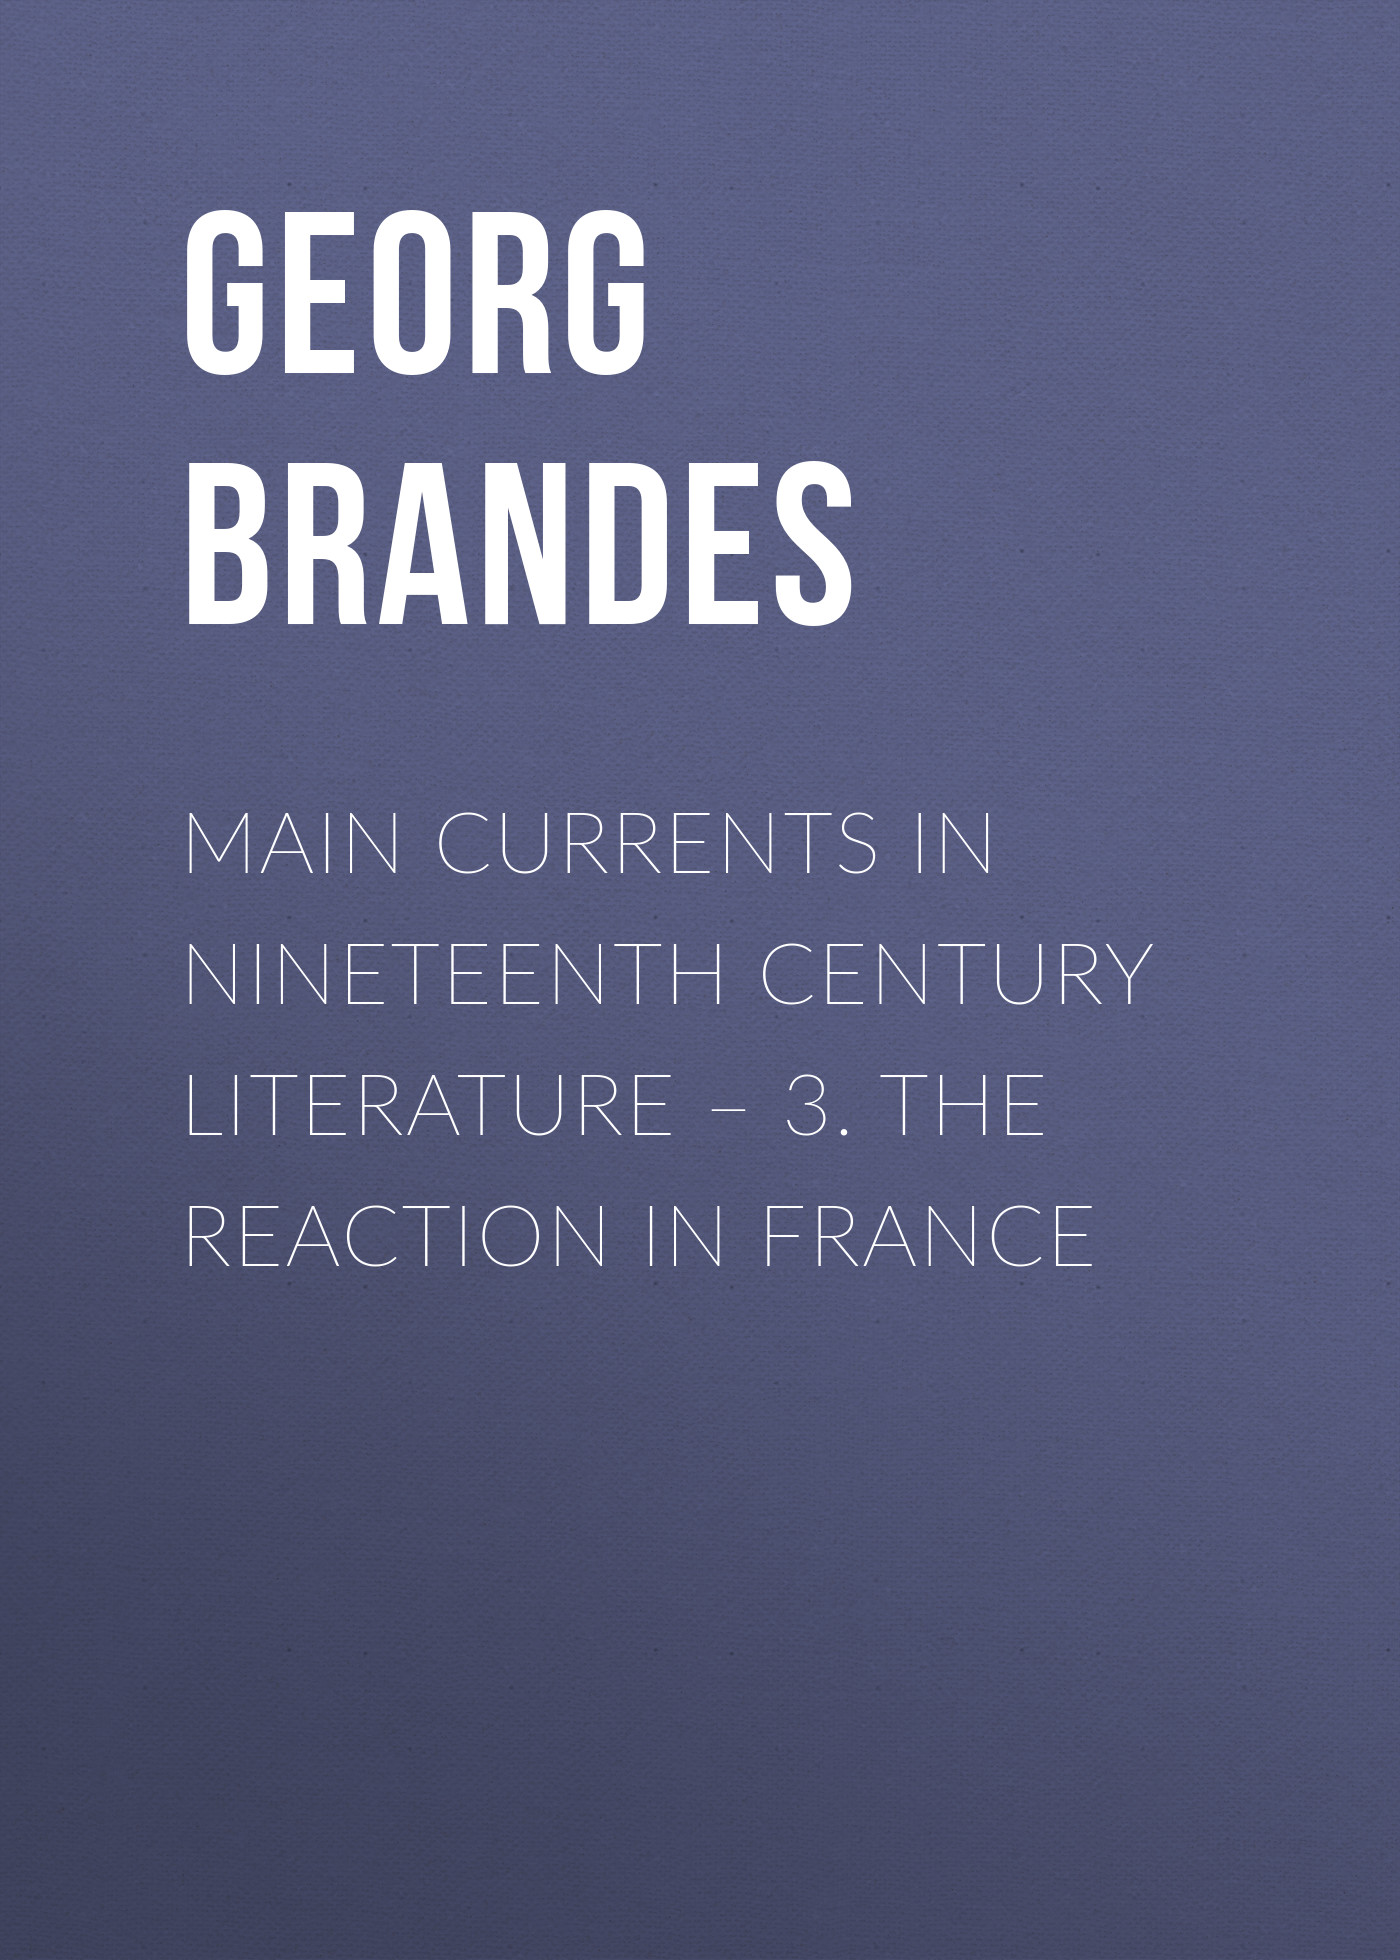 Main Currents in Nineteenth Century Literature– 3. The Reaction in France